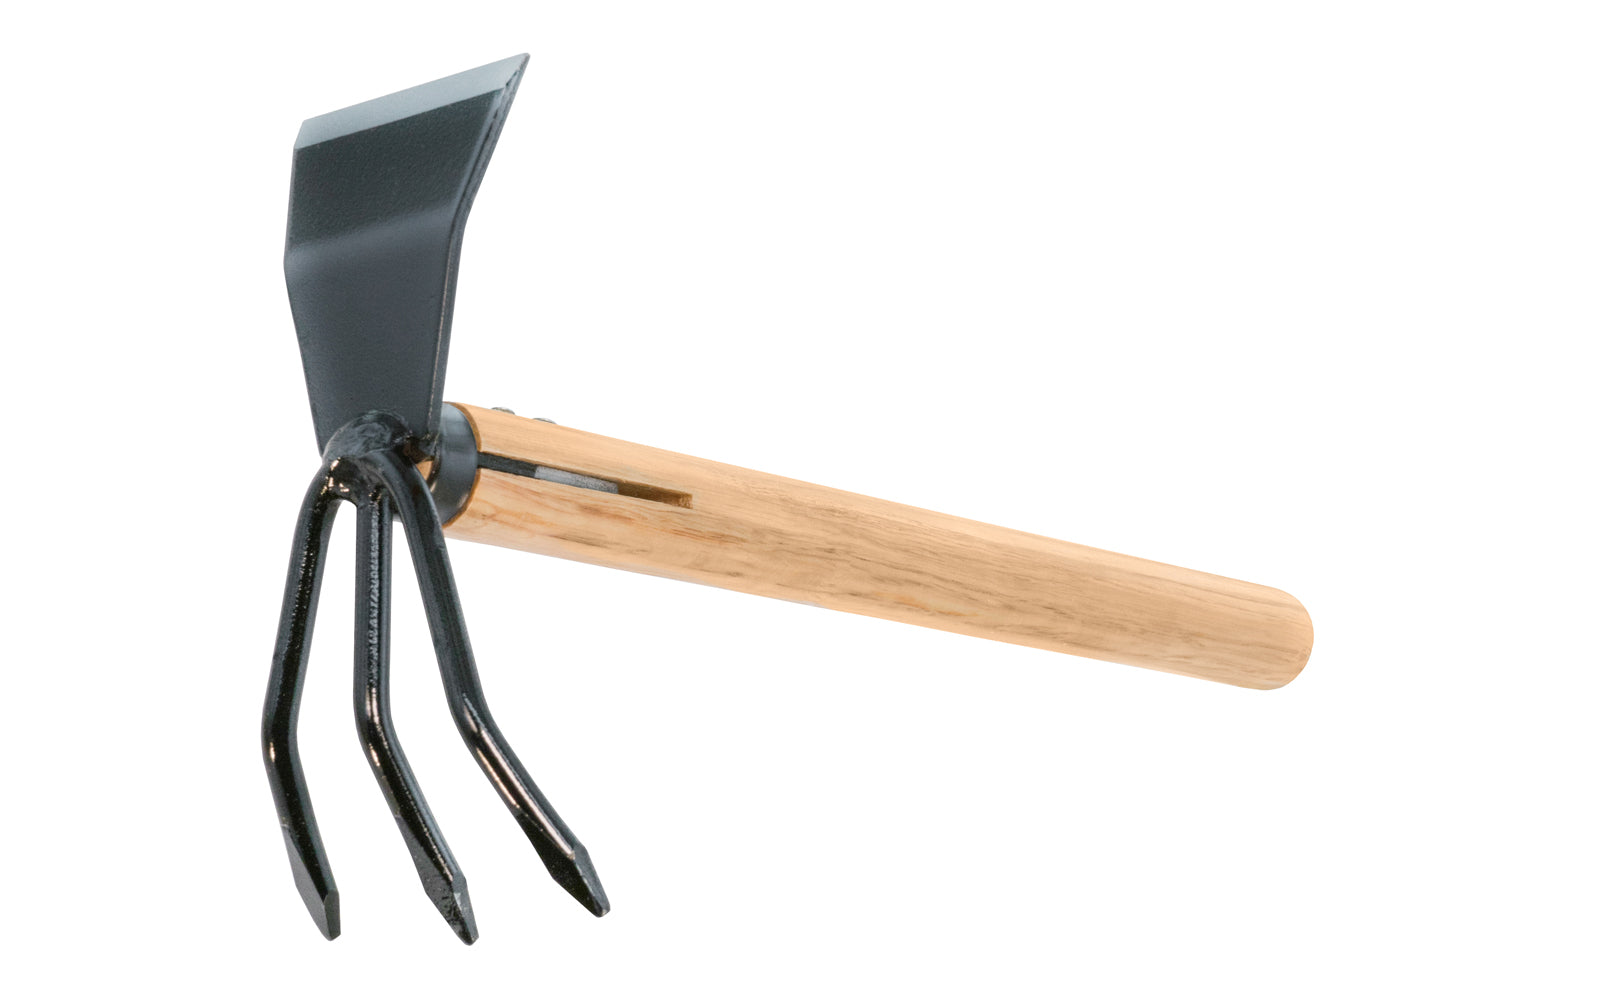 A quality Japanese Cuttlefish Hand Hoe made by Asano in Japan. Three tine rake & hoe blade are made of high carbon steel, & the fork prong blades cut tough weeds & roots with ease. Hoe is also good for harvesting & cultivating soil. Made in Japan. For turning soil & weeding roots. 3 Tine Hoe. Model 05030. 4994898050307